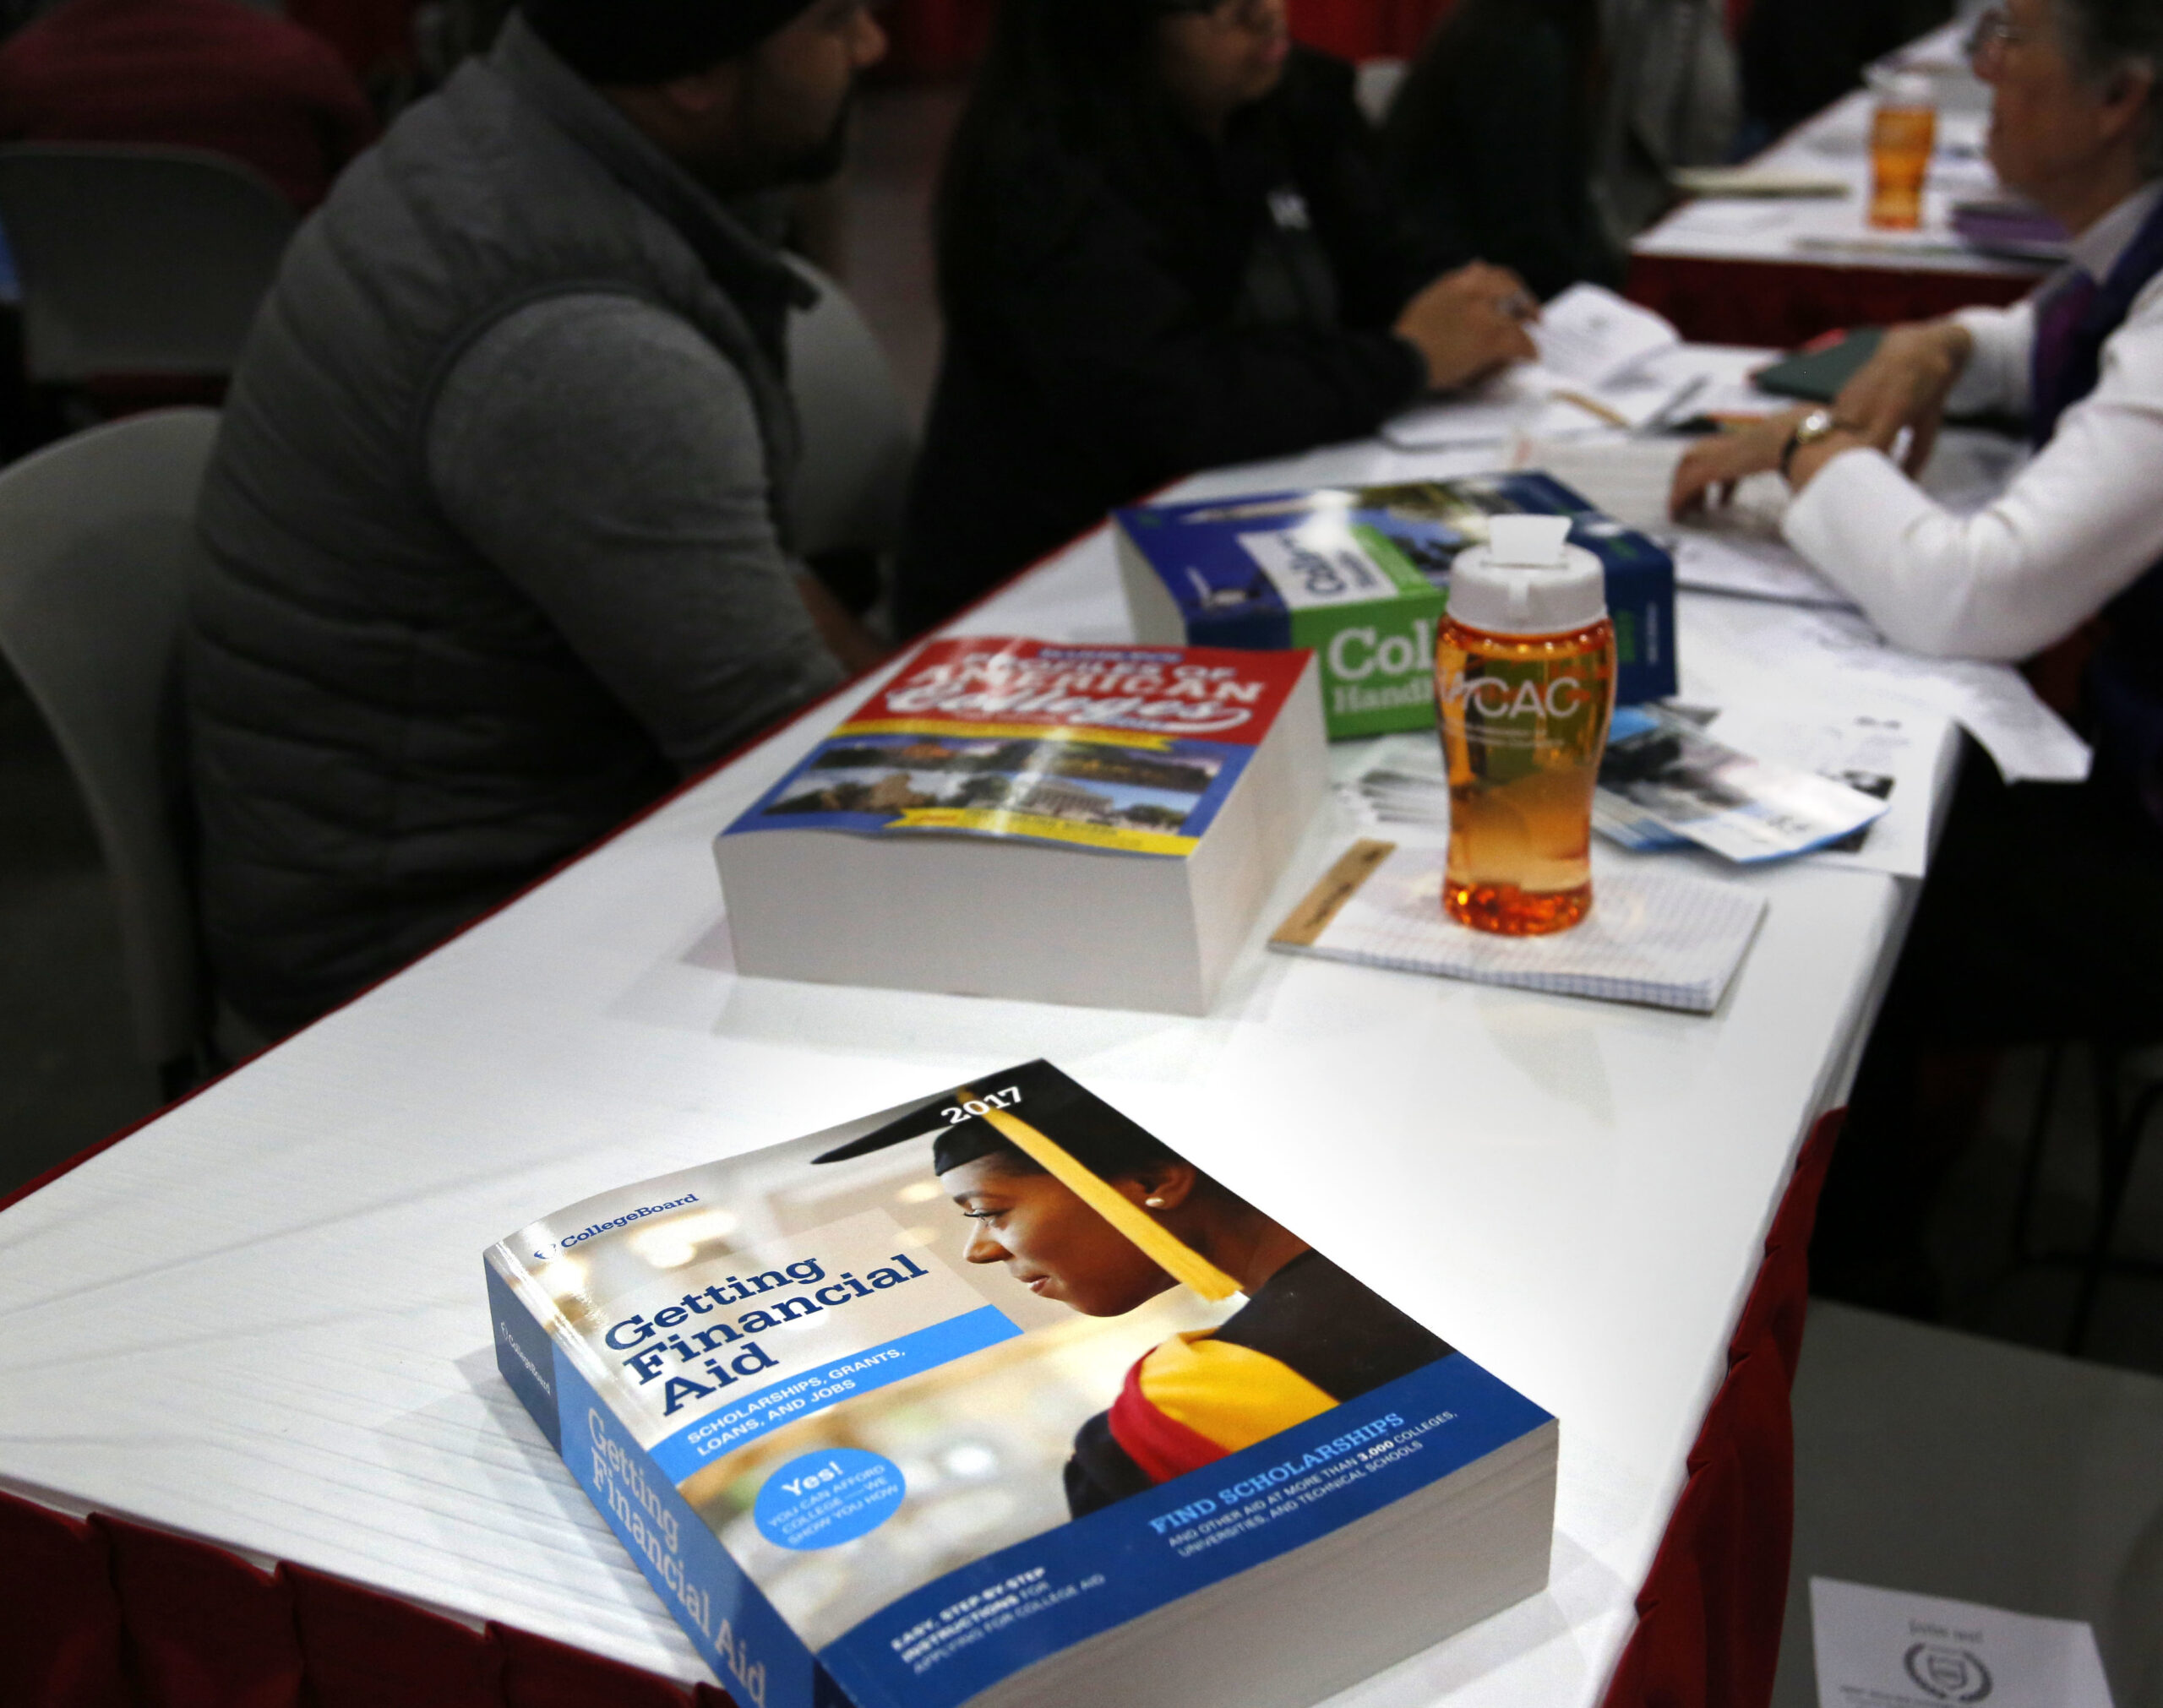 A book about financial aid is seen at a college fair in New York